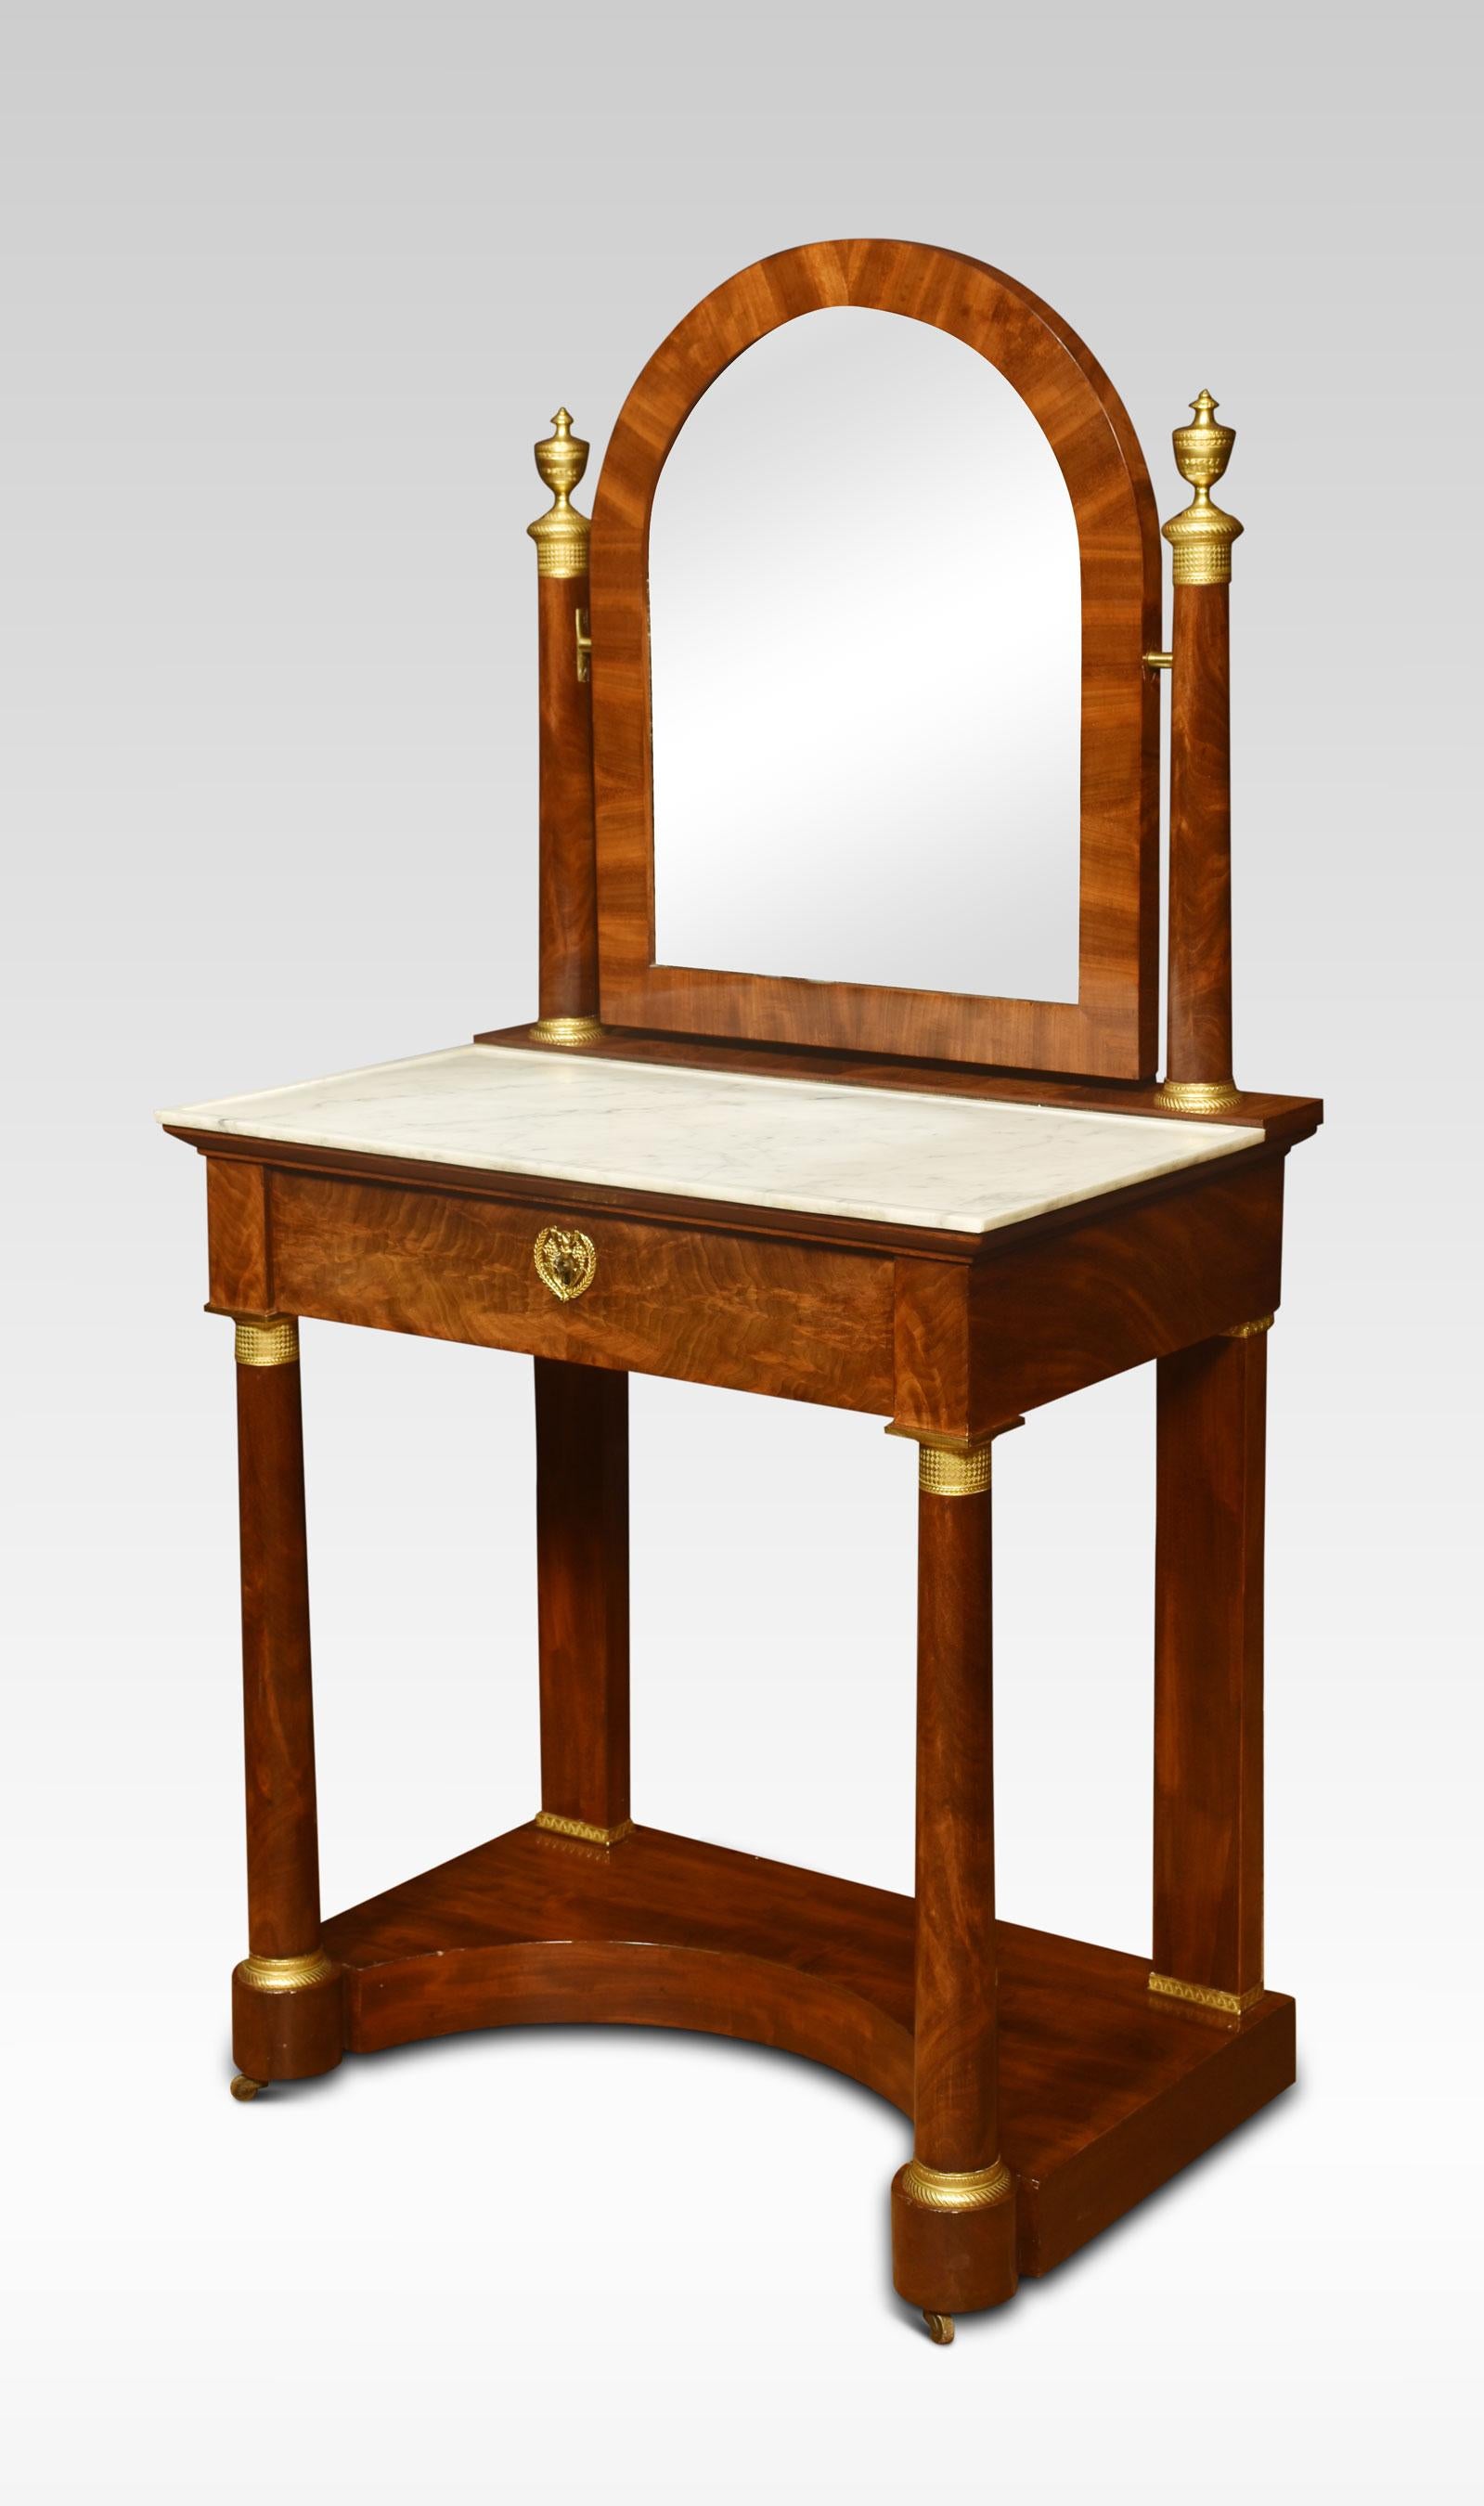 19th-century French Empire dressing table. The upright supports of cylindrical form, flanking the original oval mirror plate. The base section having an inset marble top over a large freeze drawer. All raised up on cylindrical supports united by